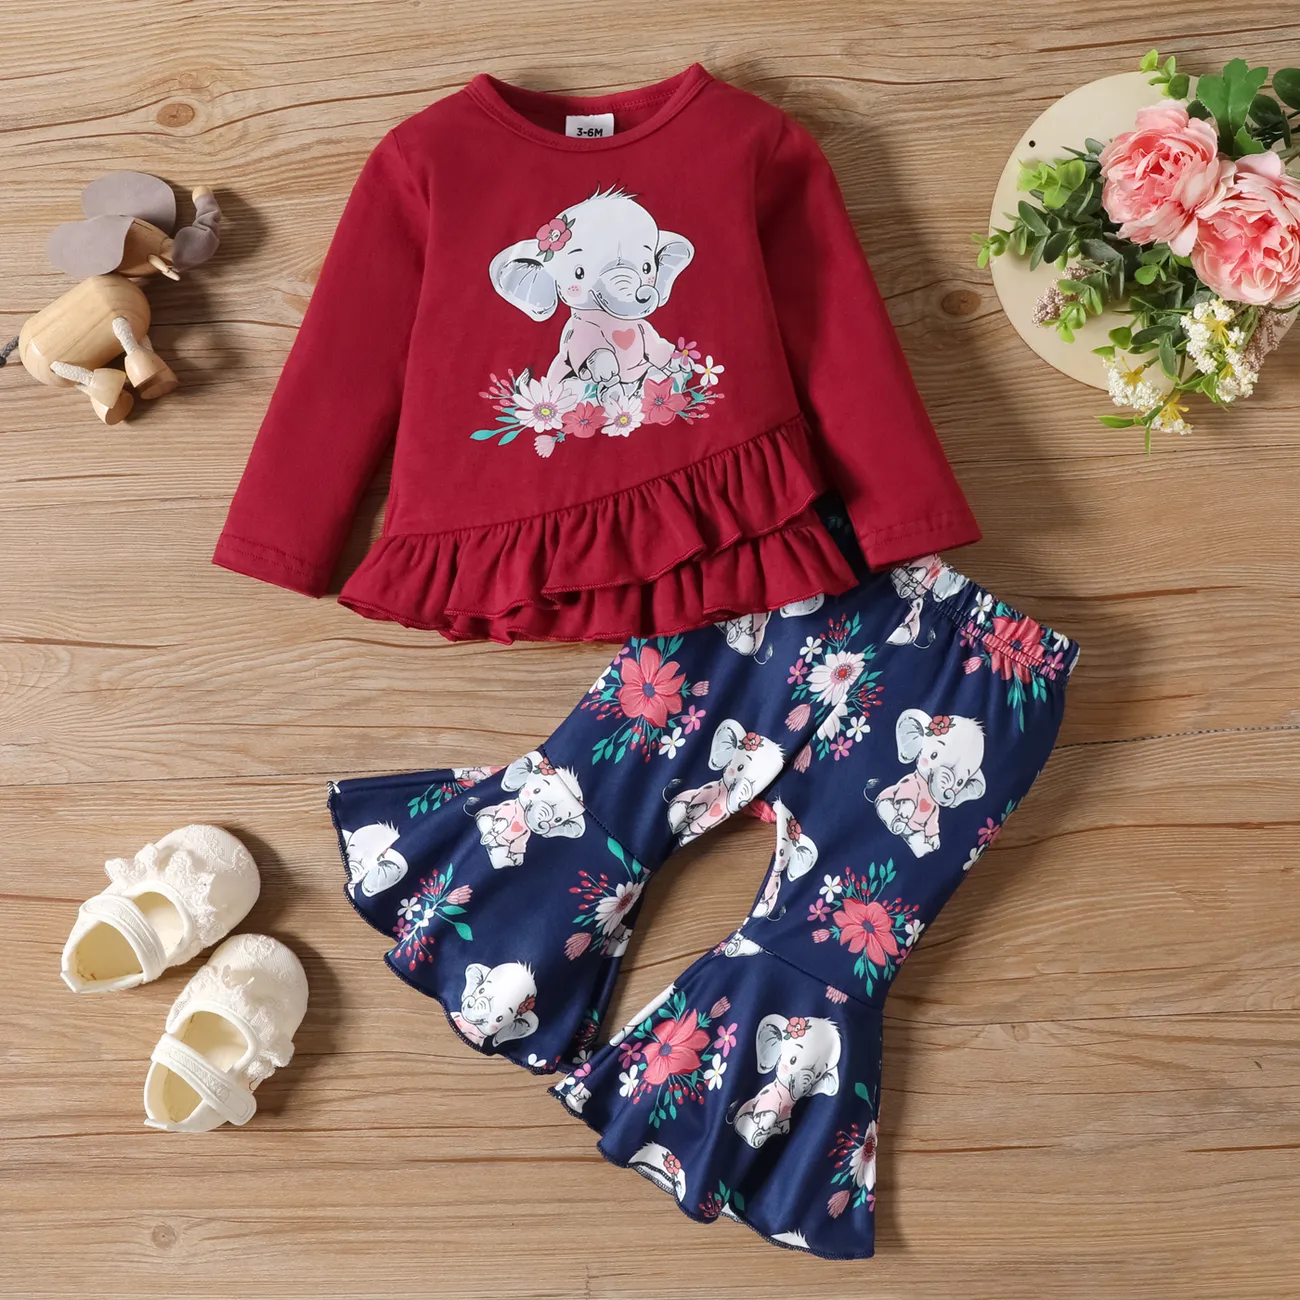 2pcs Baby Girl 95% Cotton Elephant Print Ruffle Long-sleeve Top and Allover Floral & Elephant Print Flared Pants Set  big image 1